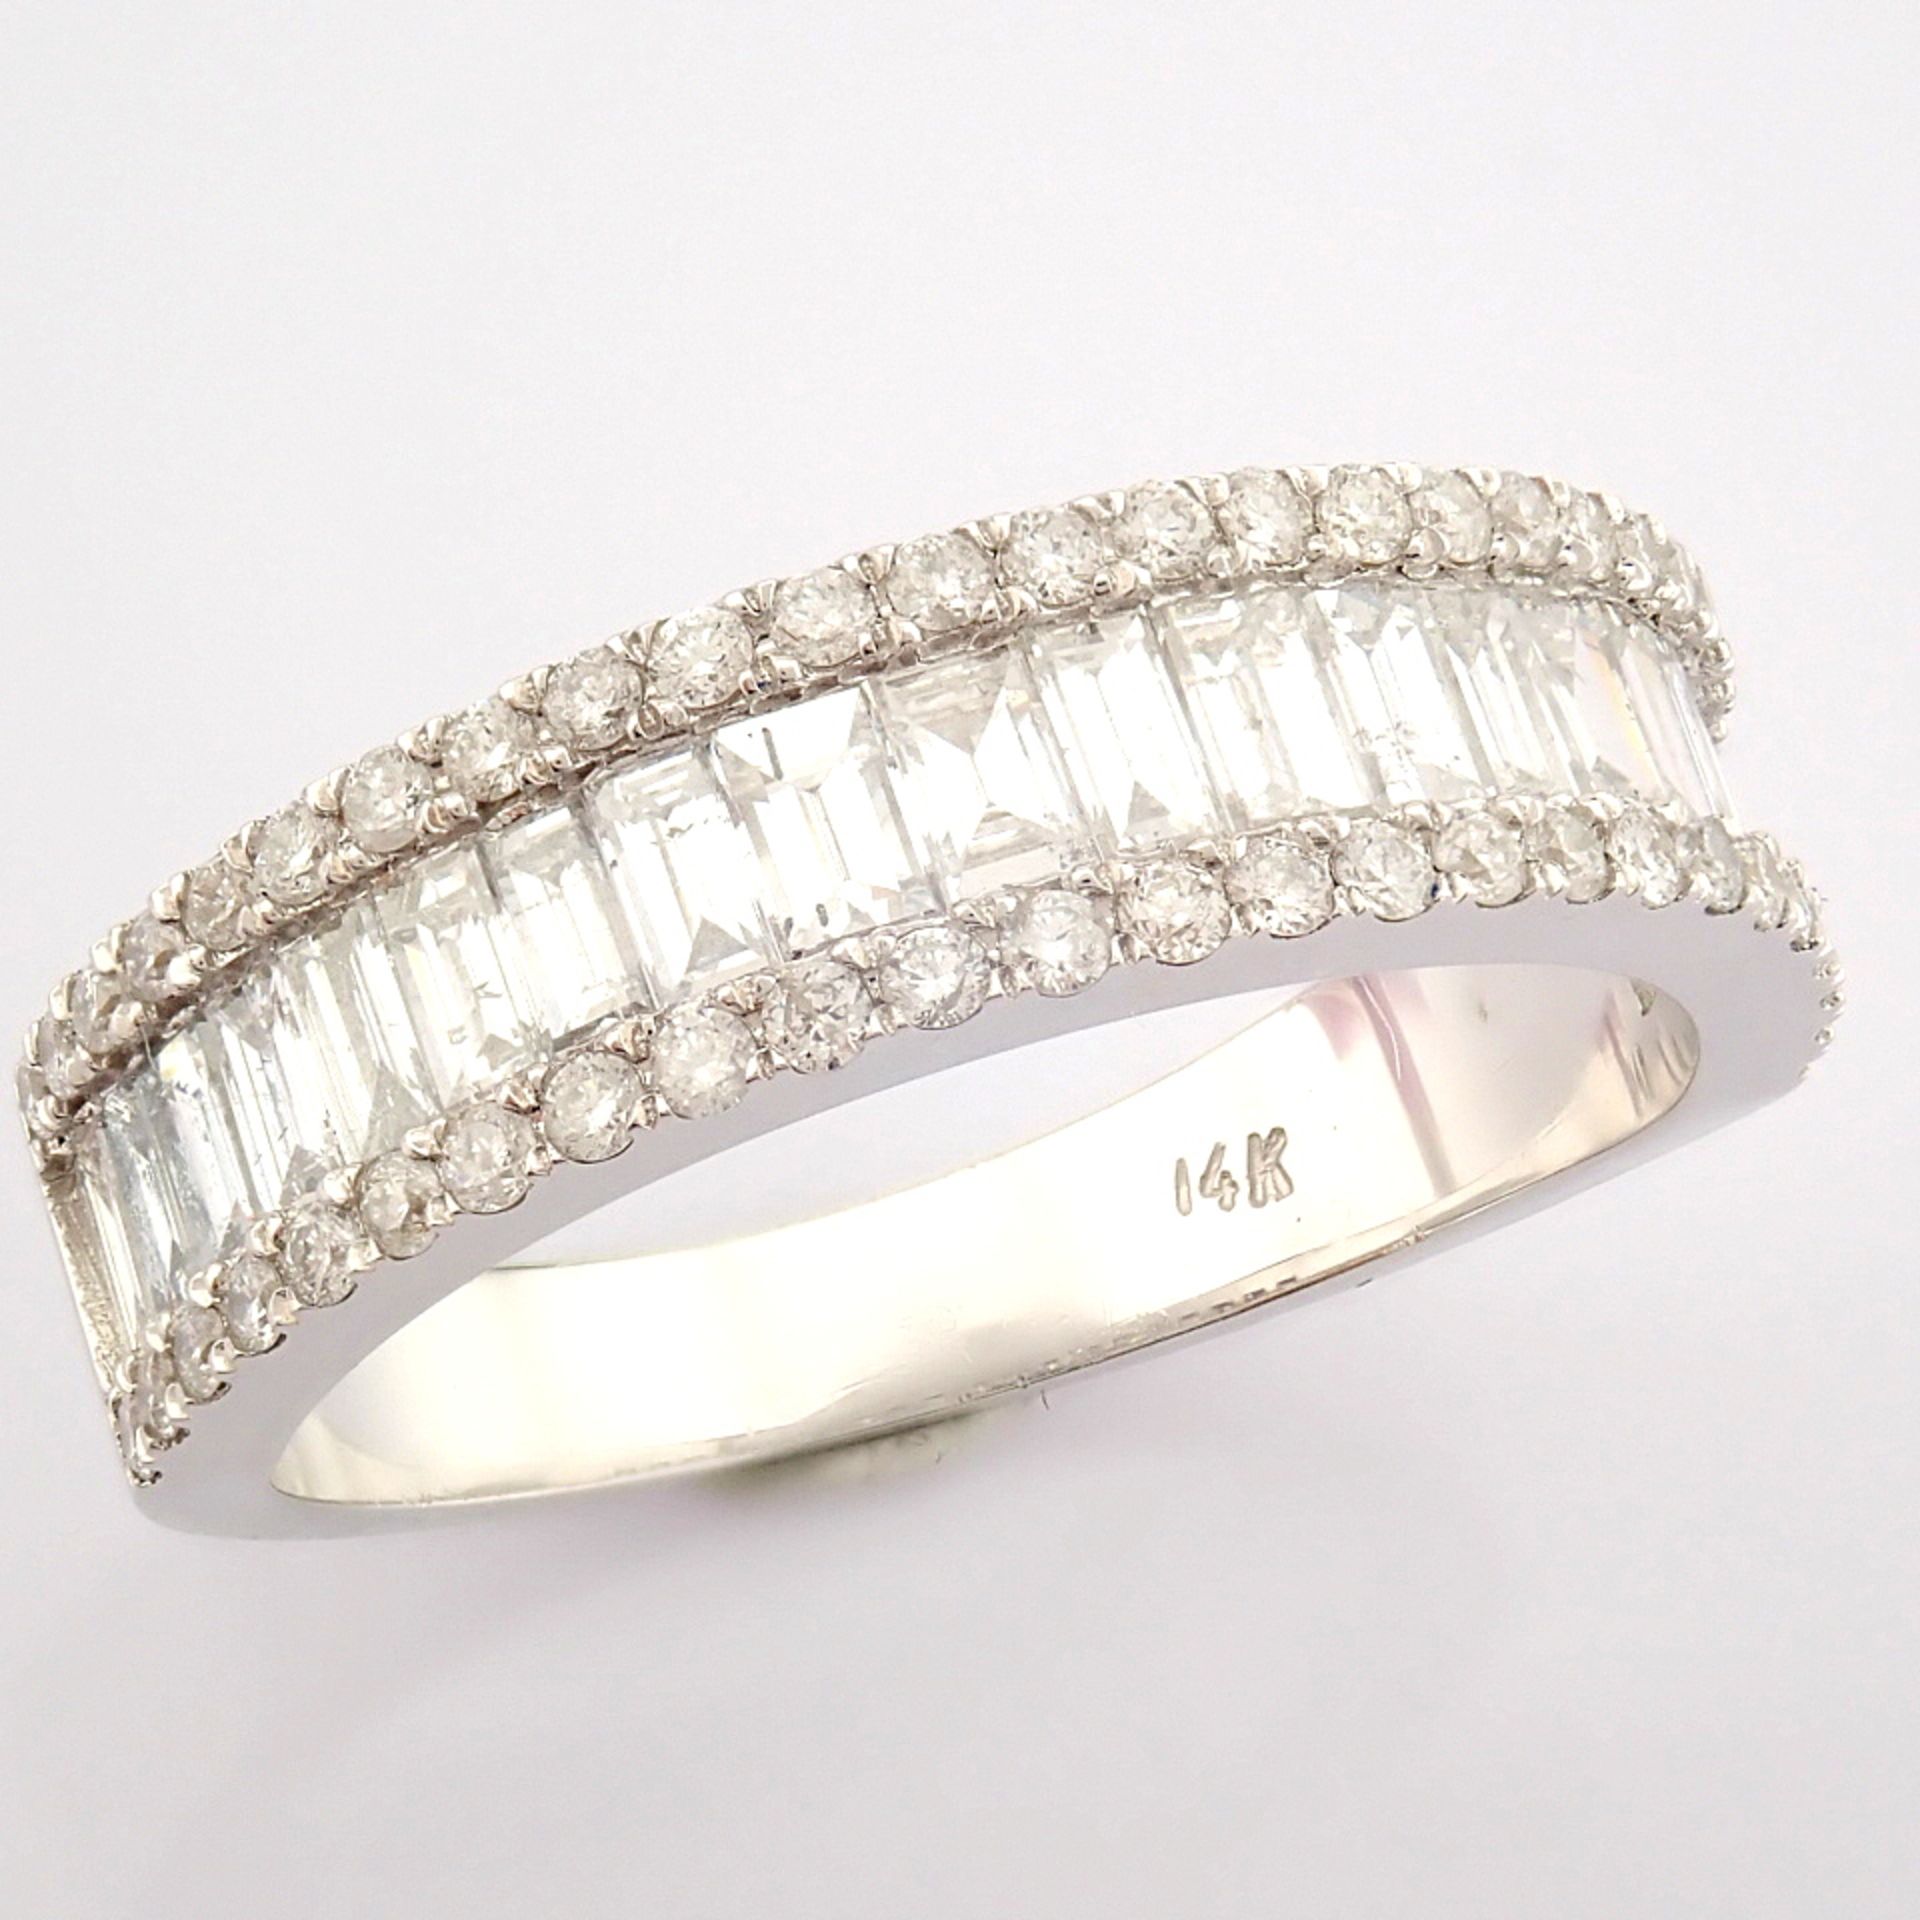 Certificated 14K White Gold Baguette Diamond & Diamond Ring (Total 1.22 ct Stone) - Image 6 of 9